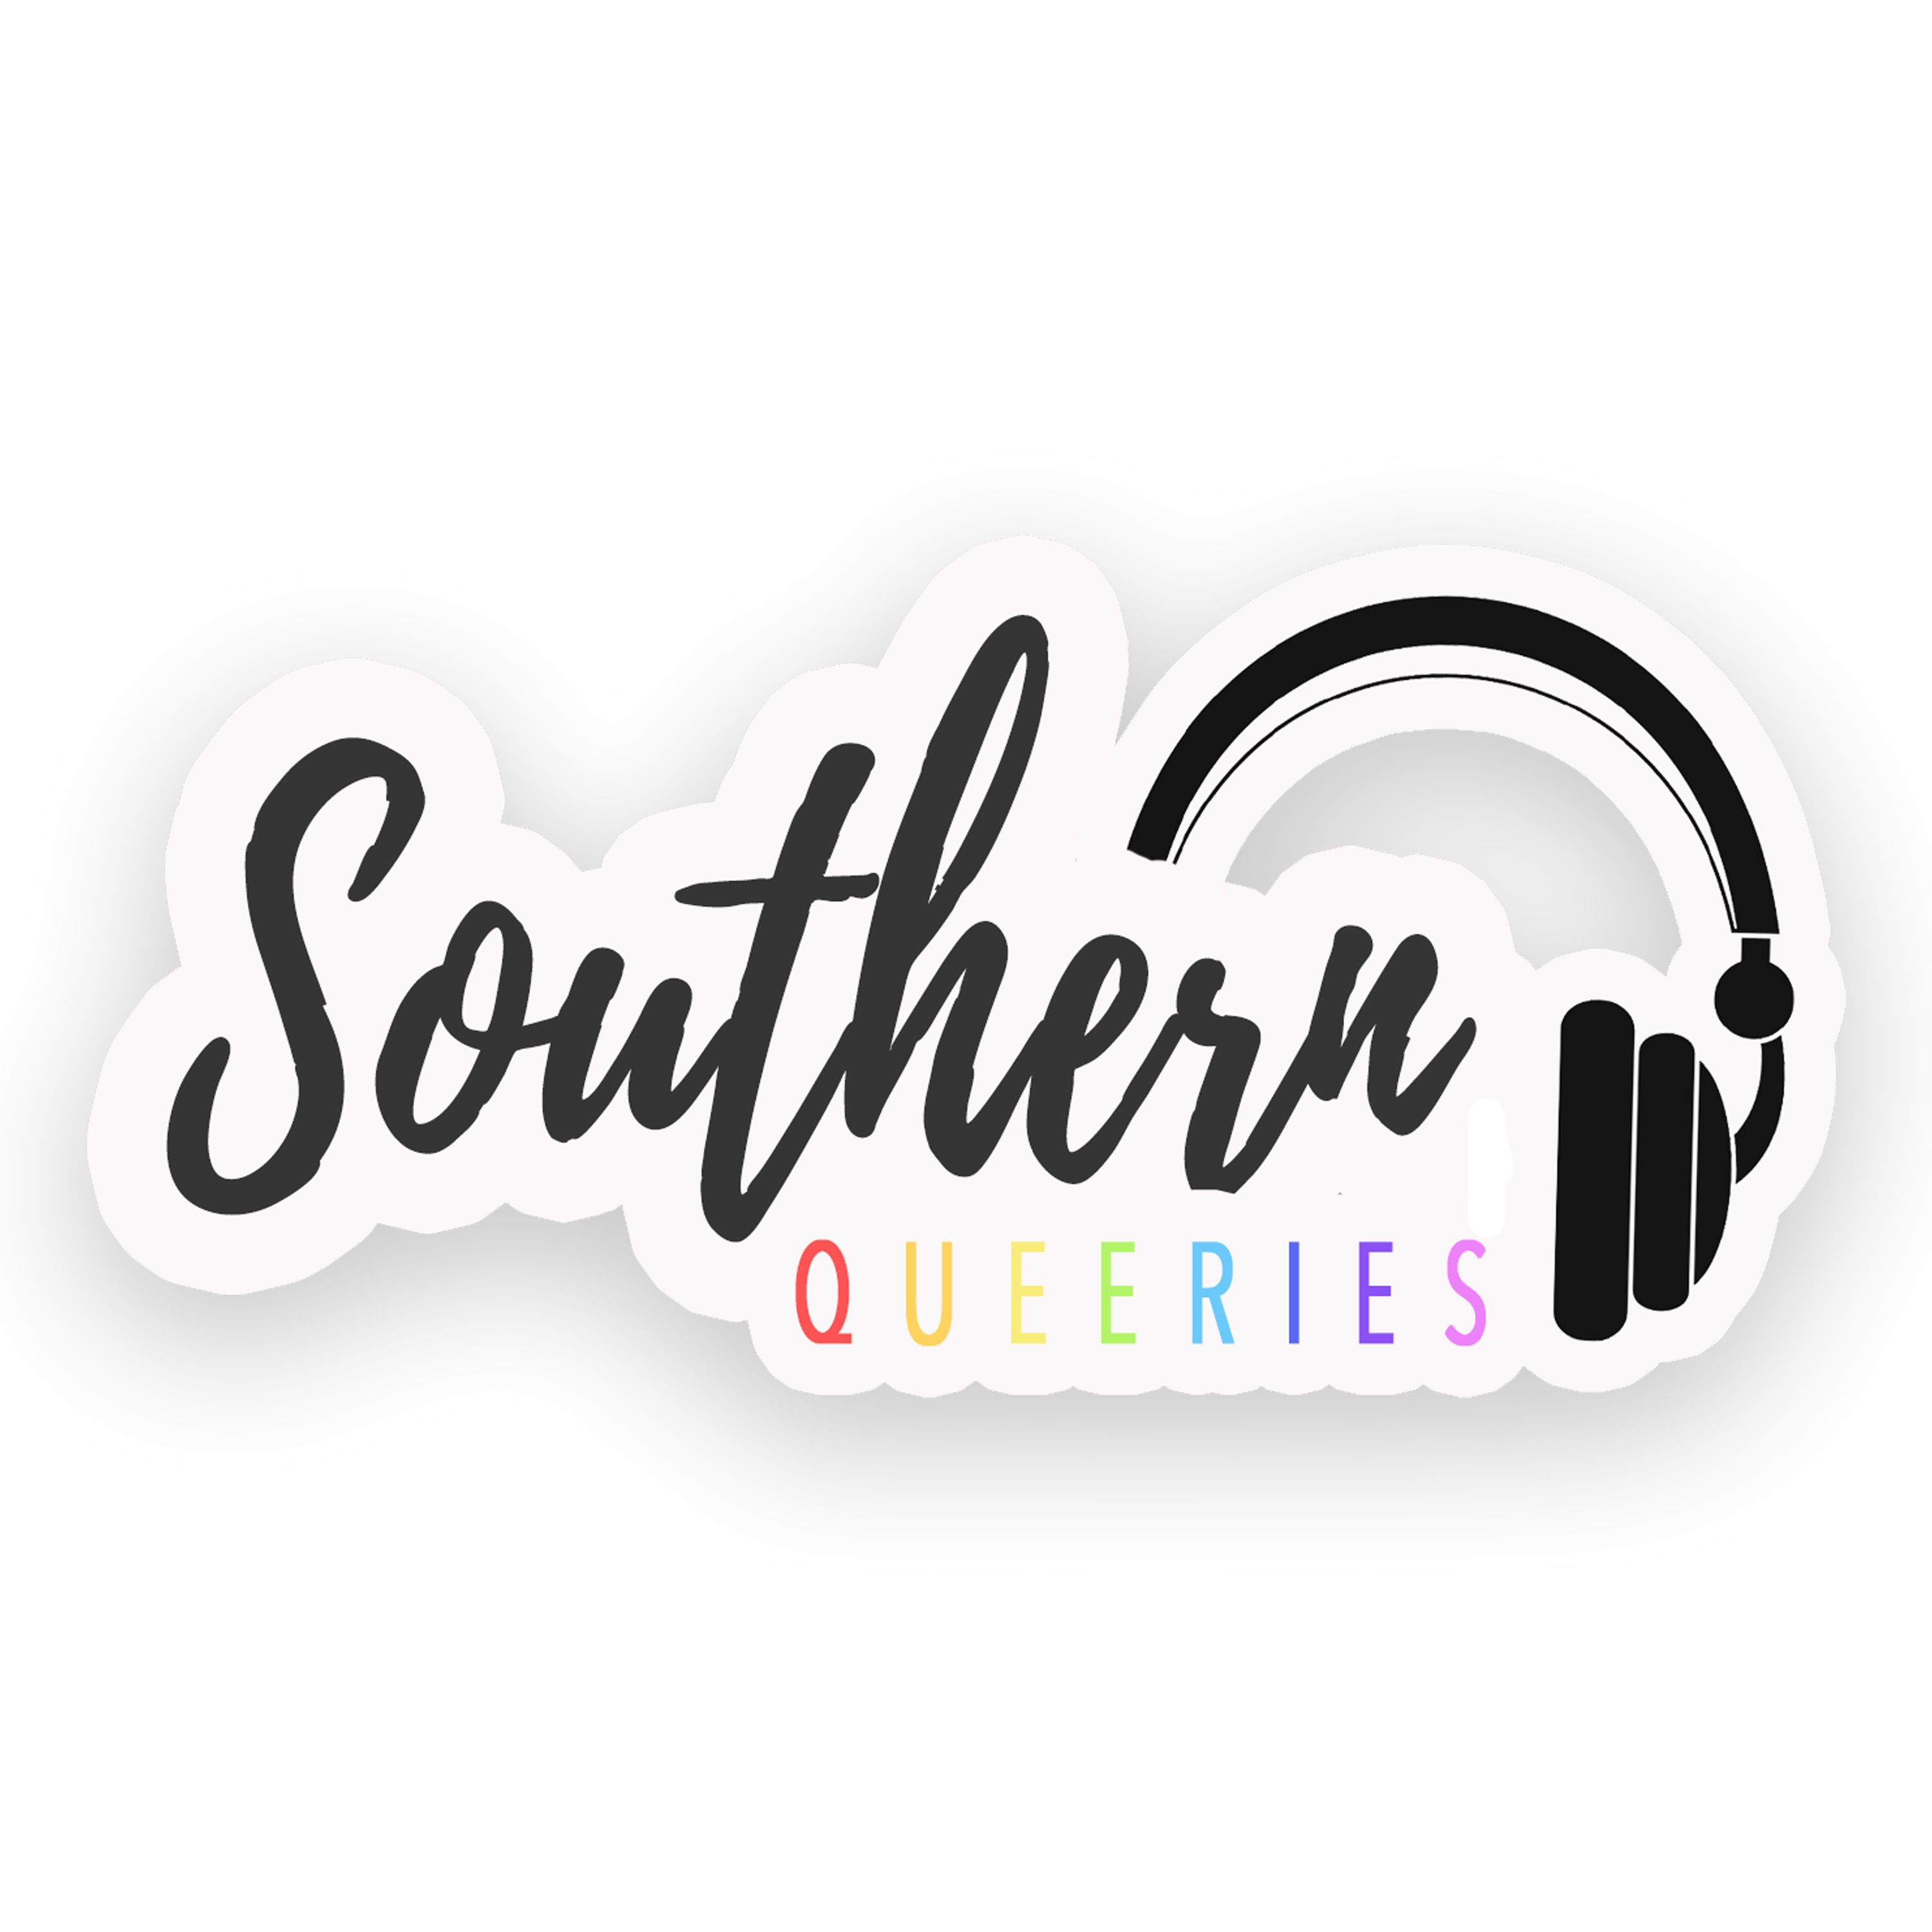 Southern Queeries crossover episode featuring Eveleena aka Ivy Les Vixens